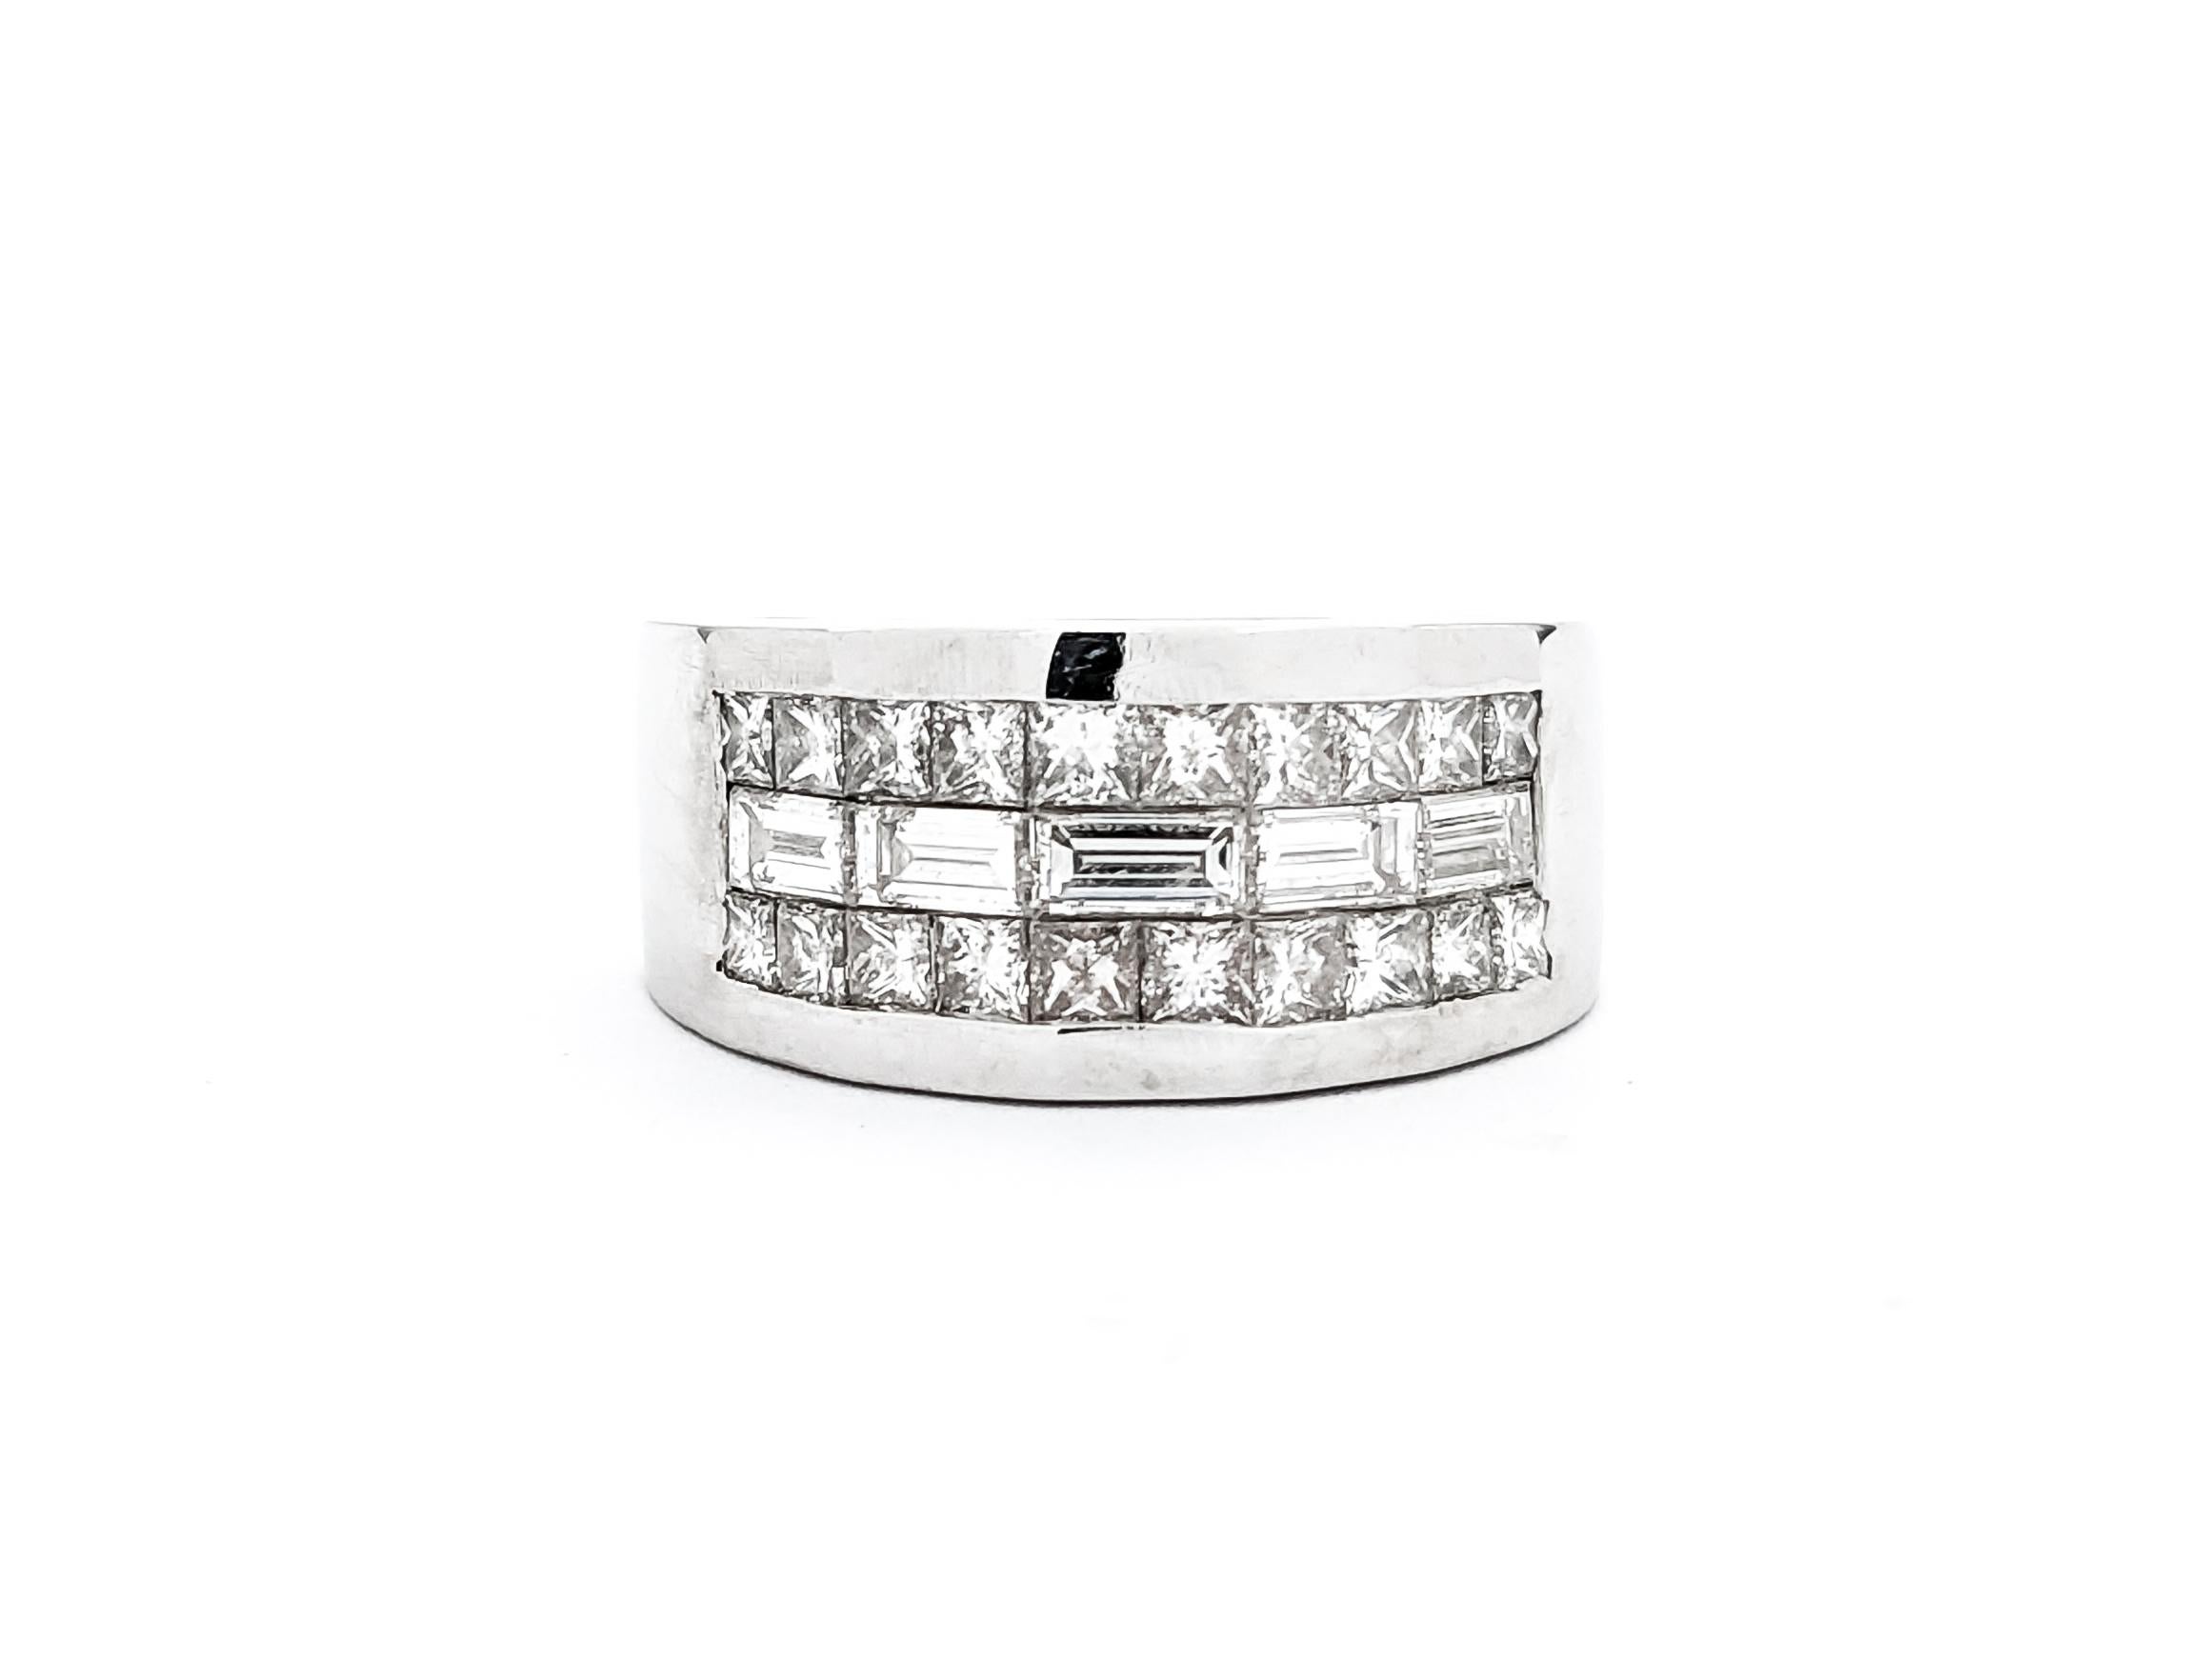 1.50ctw Diamond Ring In White Gold

This magnificent Ring is crafted in 18kt White Gold, showcasing a dazzling array of 1.50ctw diamonds in both princess and baguette cuts. Boasting a VS clarity and a near colorless hue, these diamonds radiate with